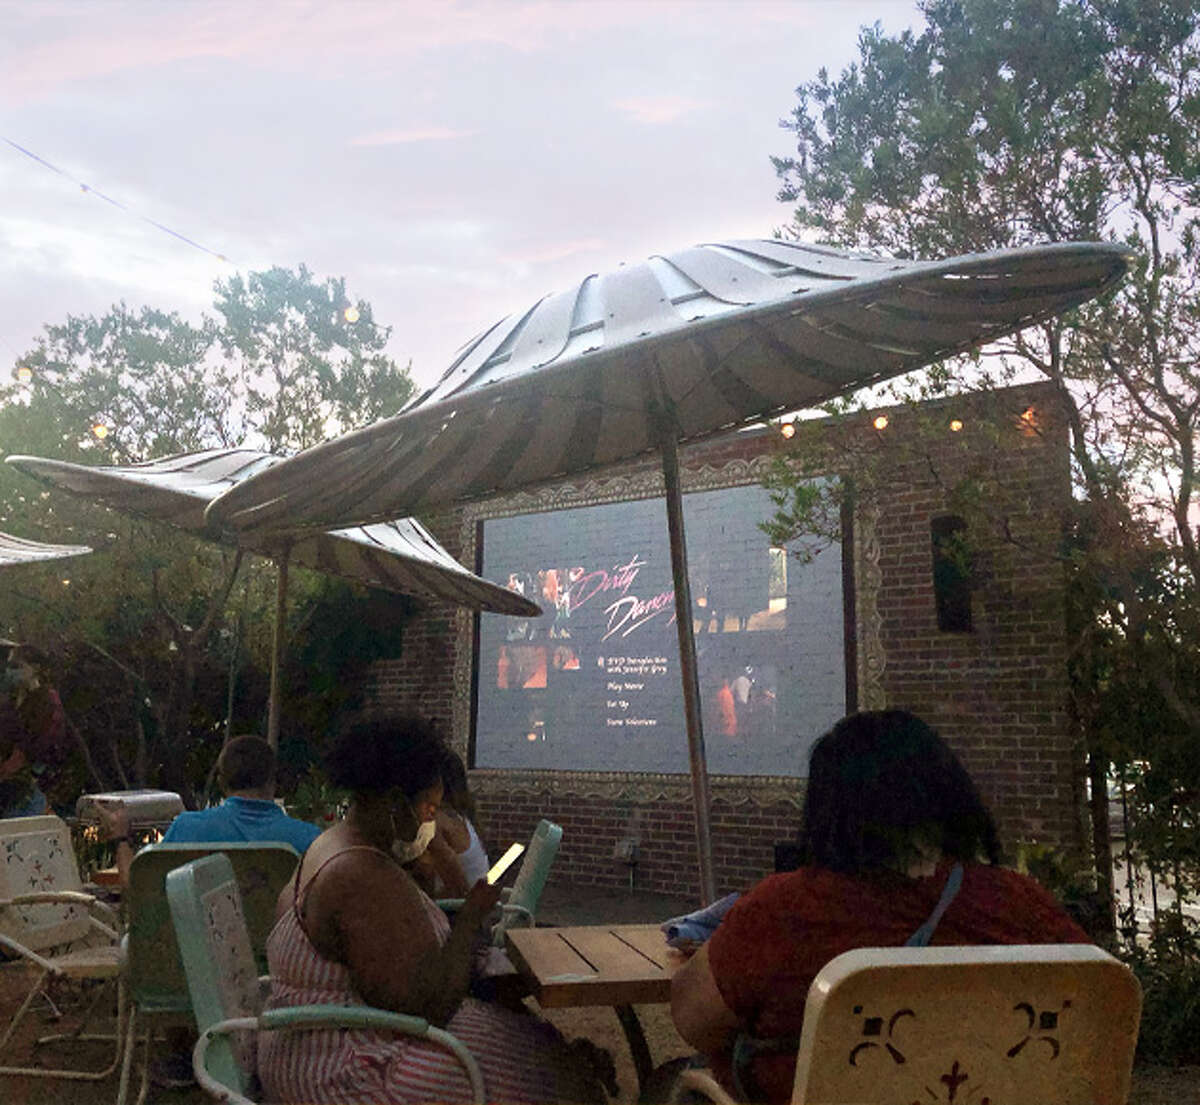 Popular brunch spot at Alamo Quarry Market to host patio movie nights every Thursday this Spring.